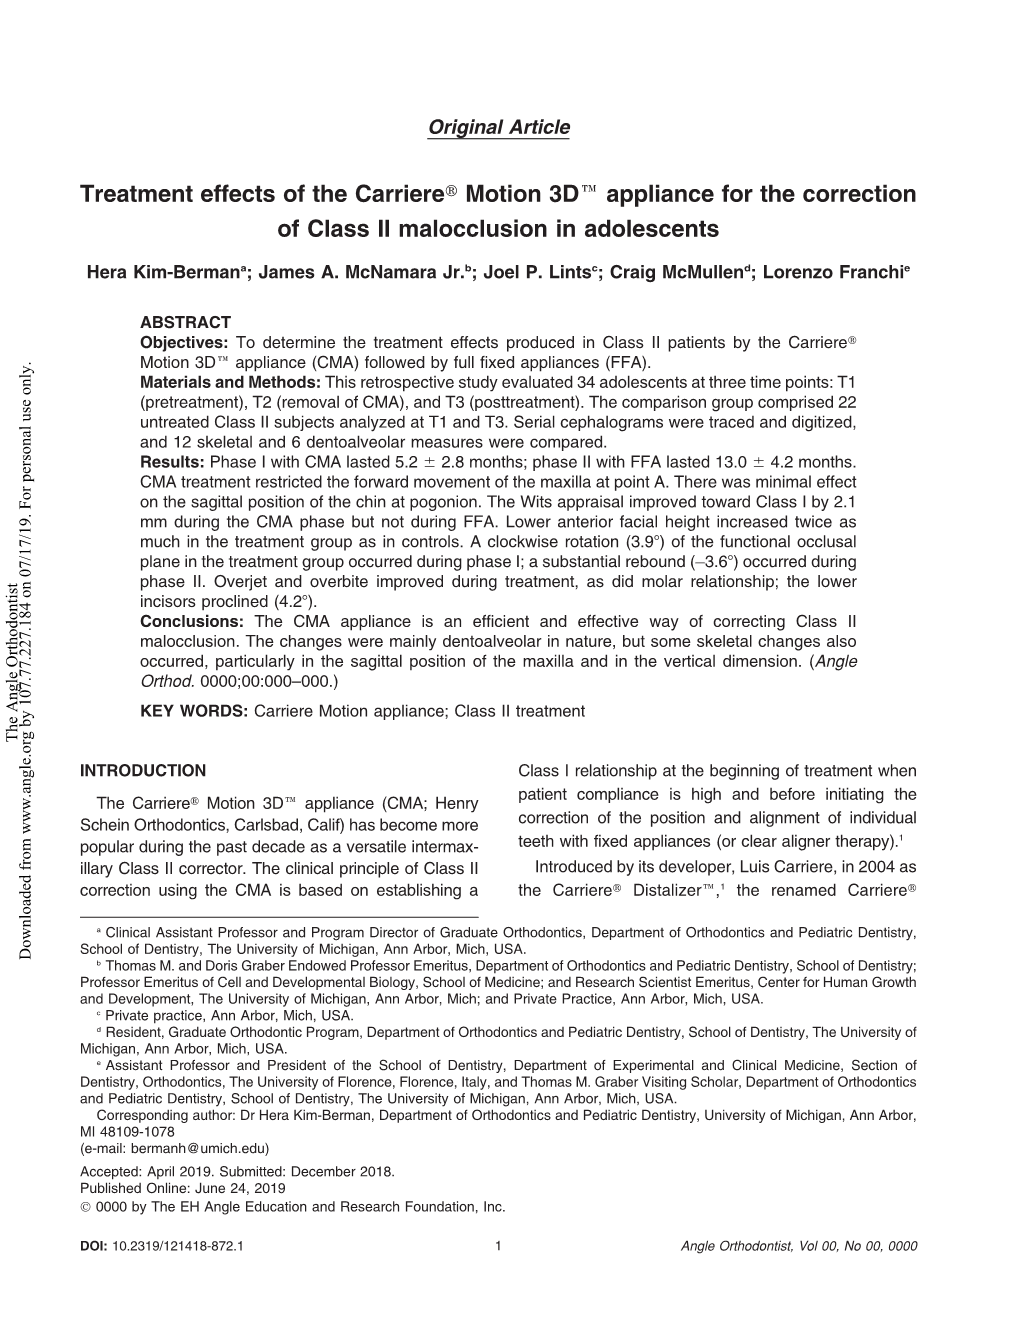 Treatment Effects of the Carrieret Motion 3De Appliance for the Correction of Class II Malocclusion in Adolescents